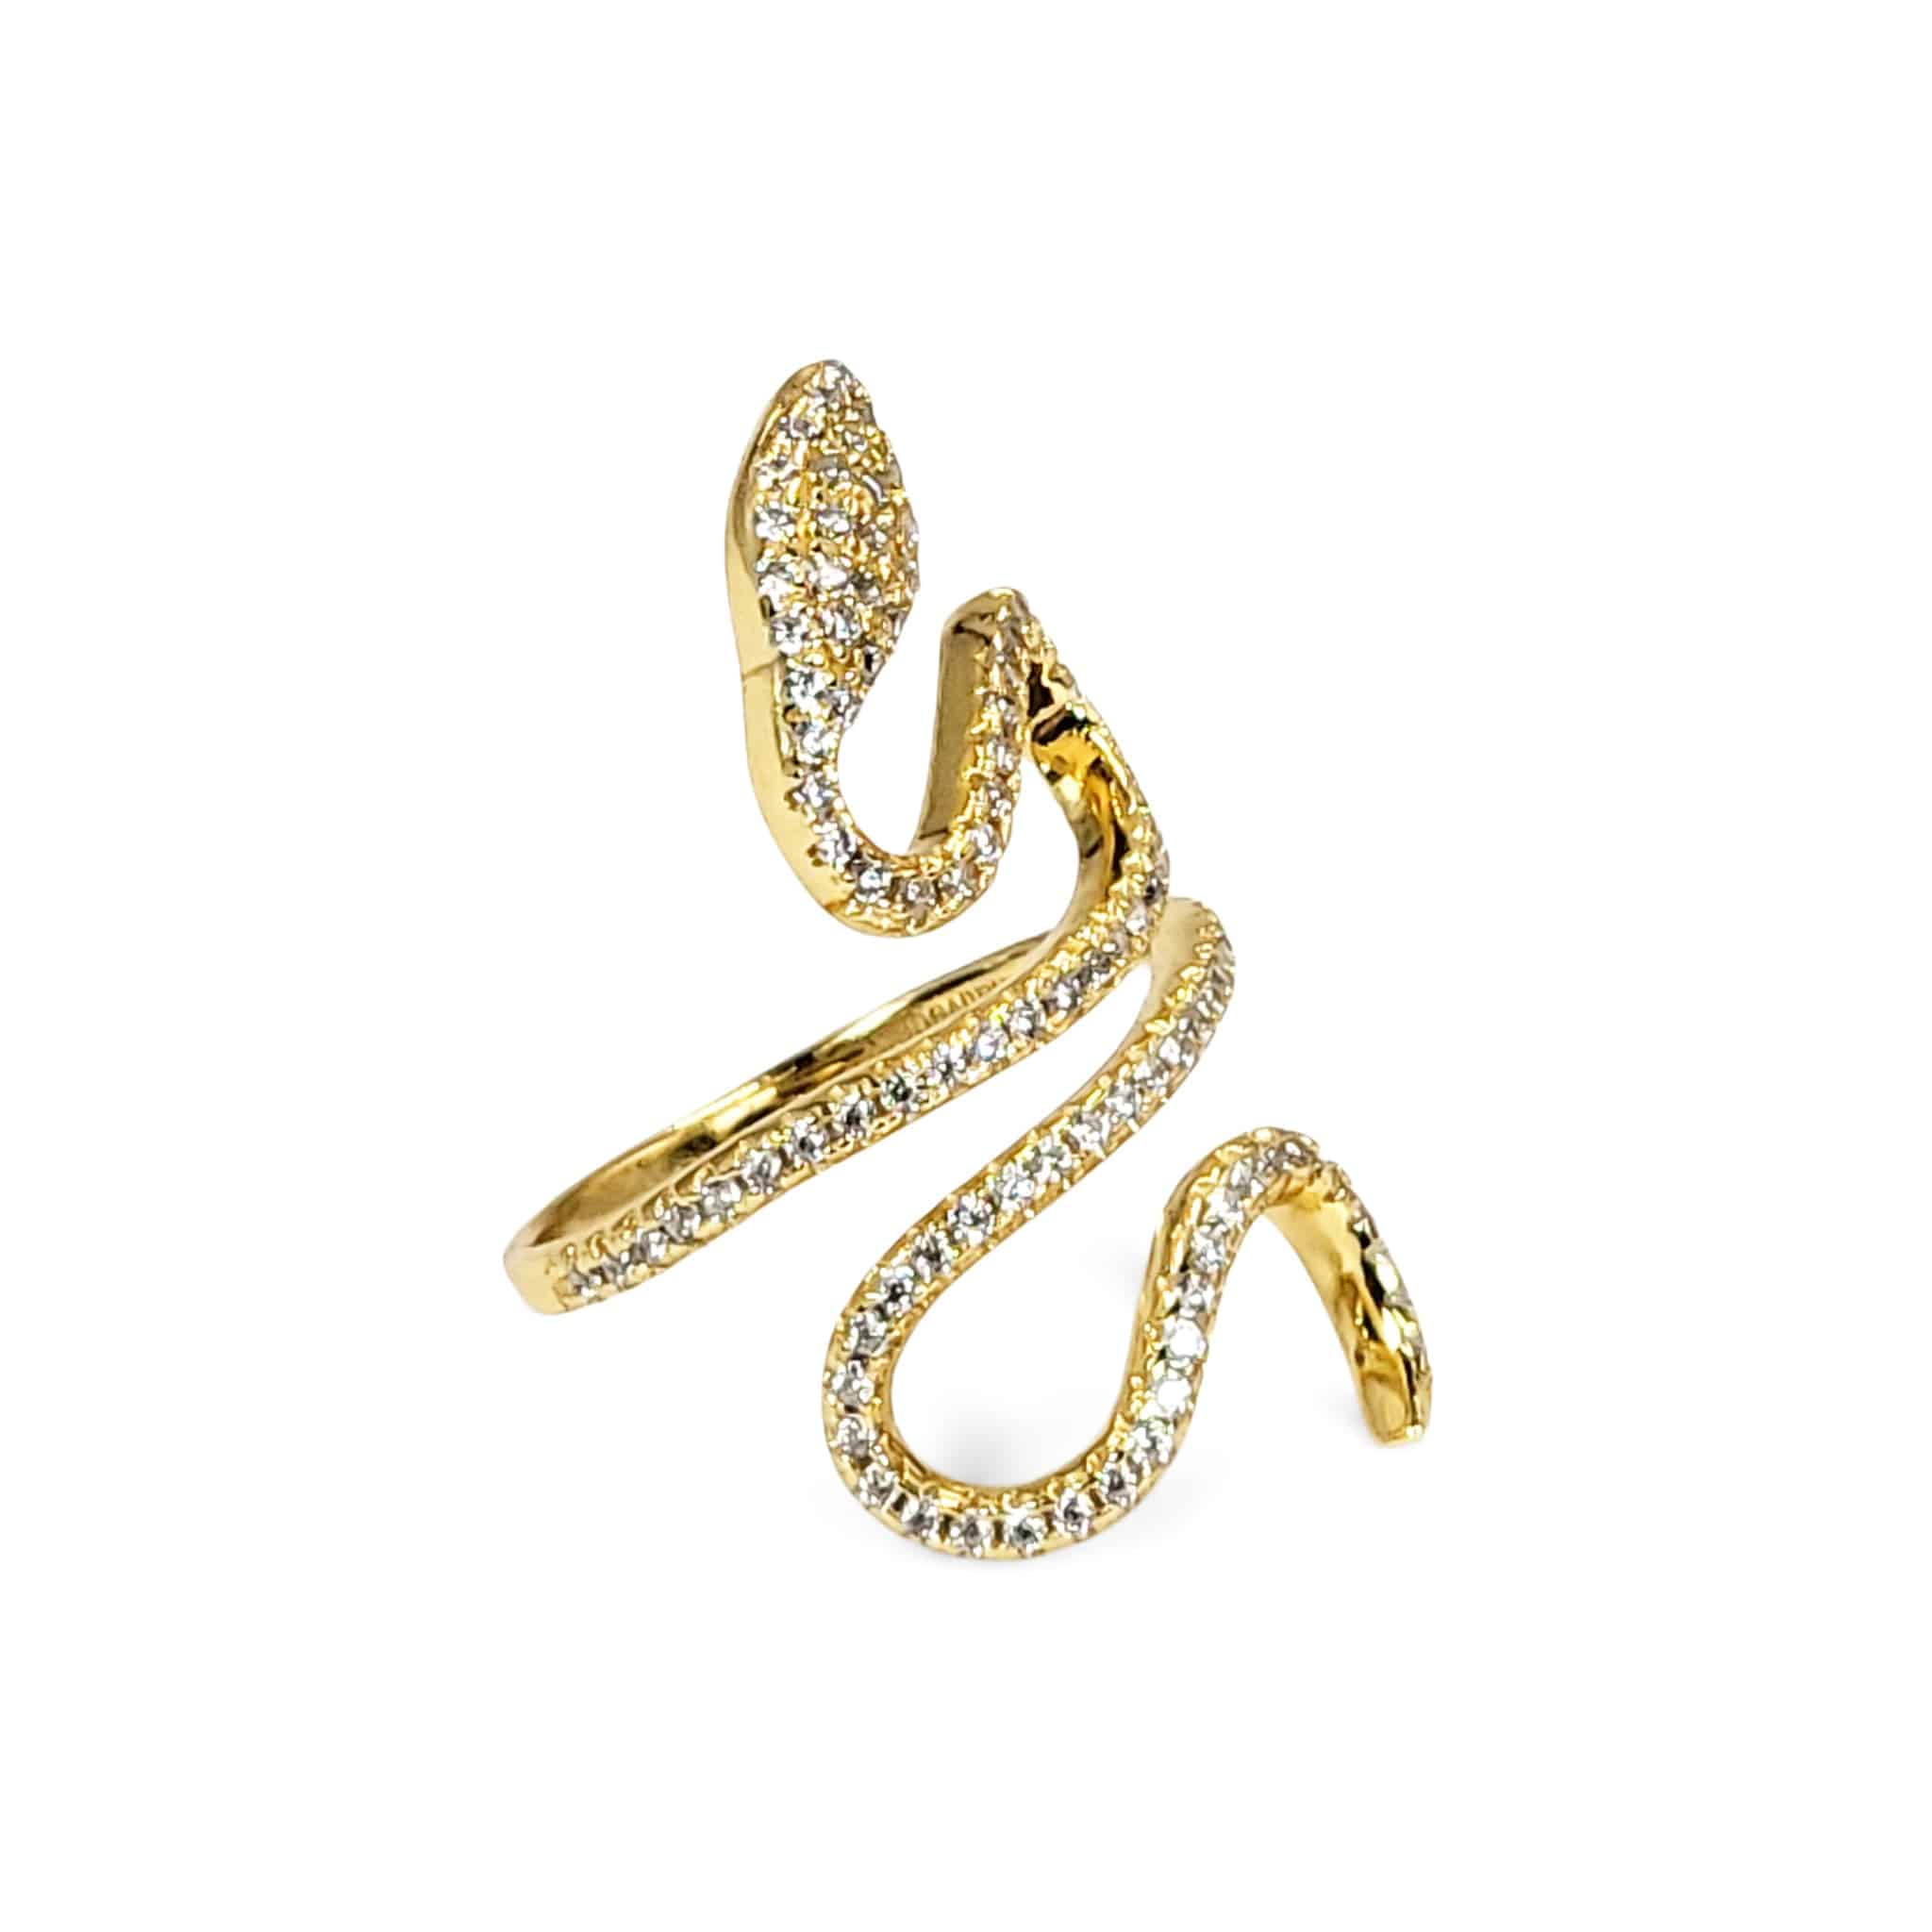 Enchanted Snake Ring - Gold - The Gilded Witch